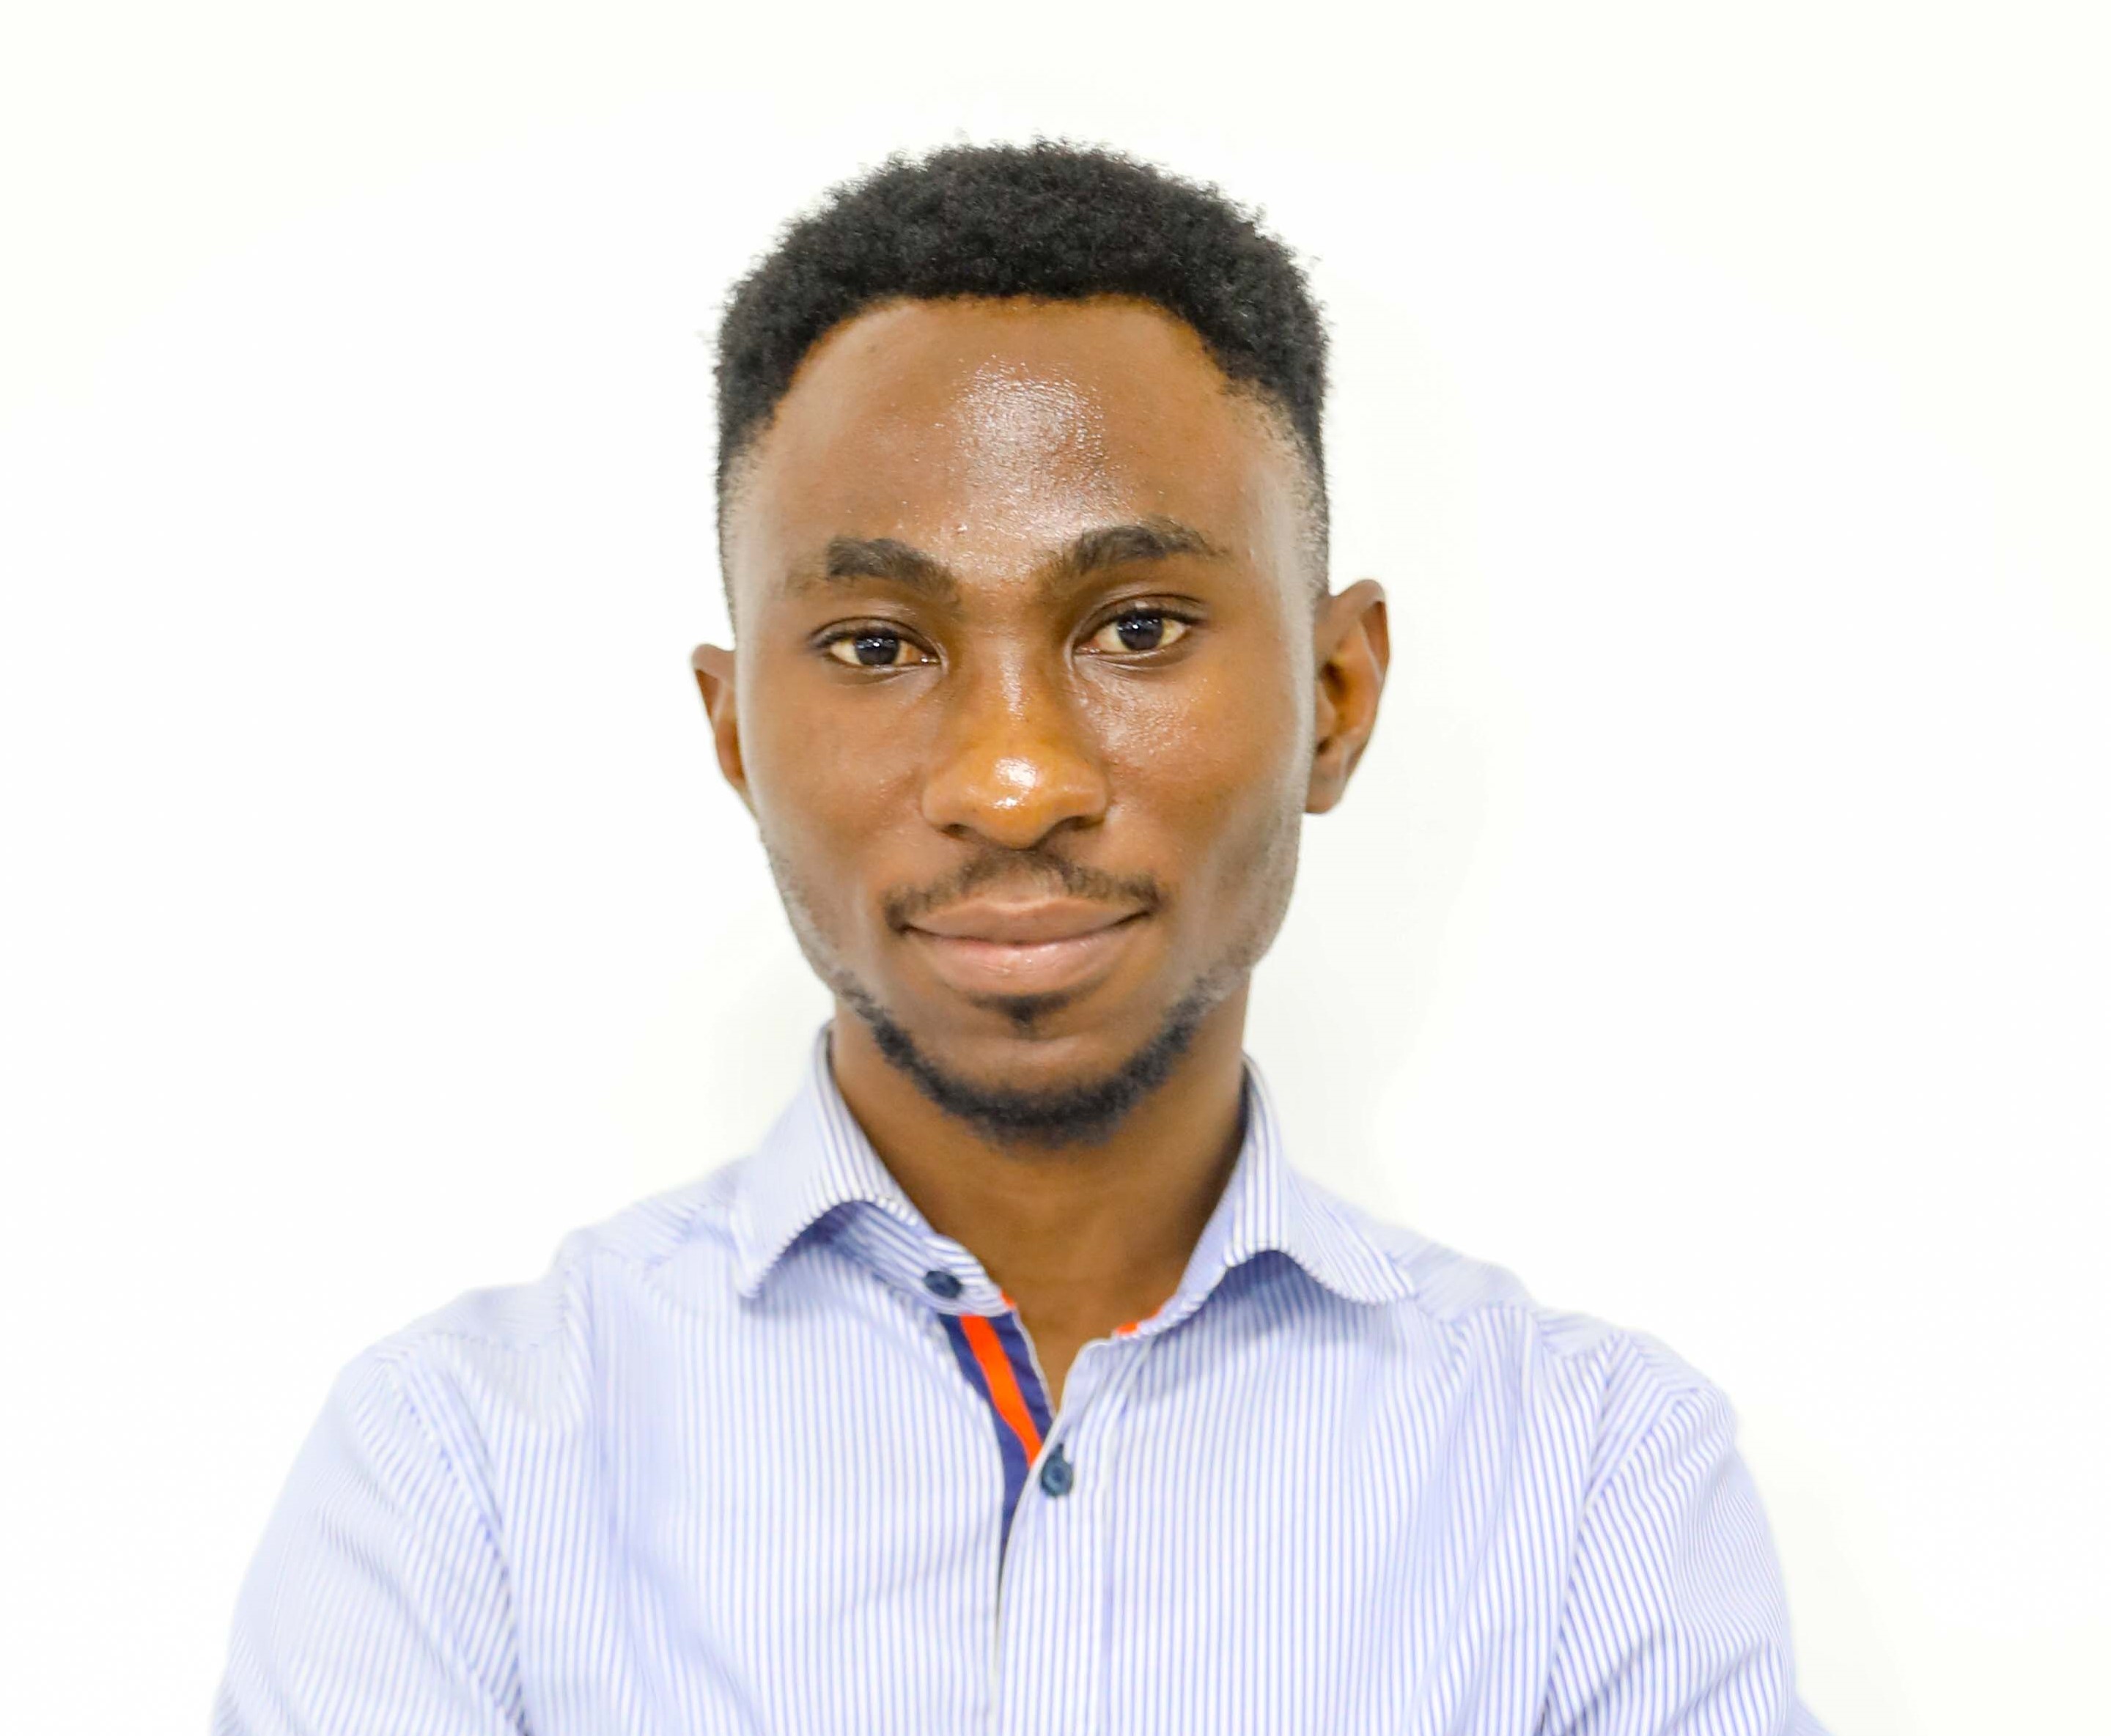 NBCC
                    Our Team - Empire Onyeije,
                    Communications Assistant